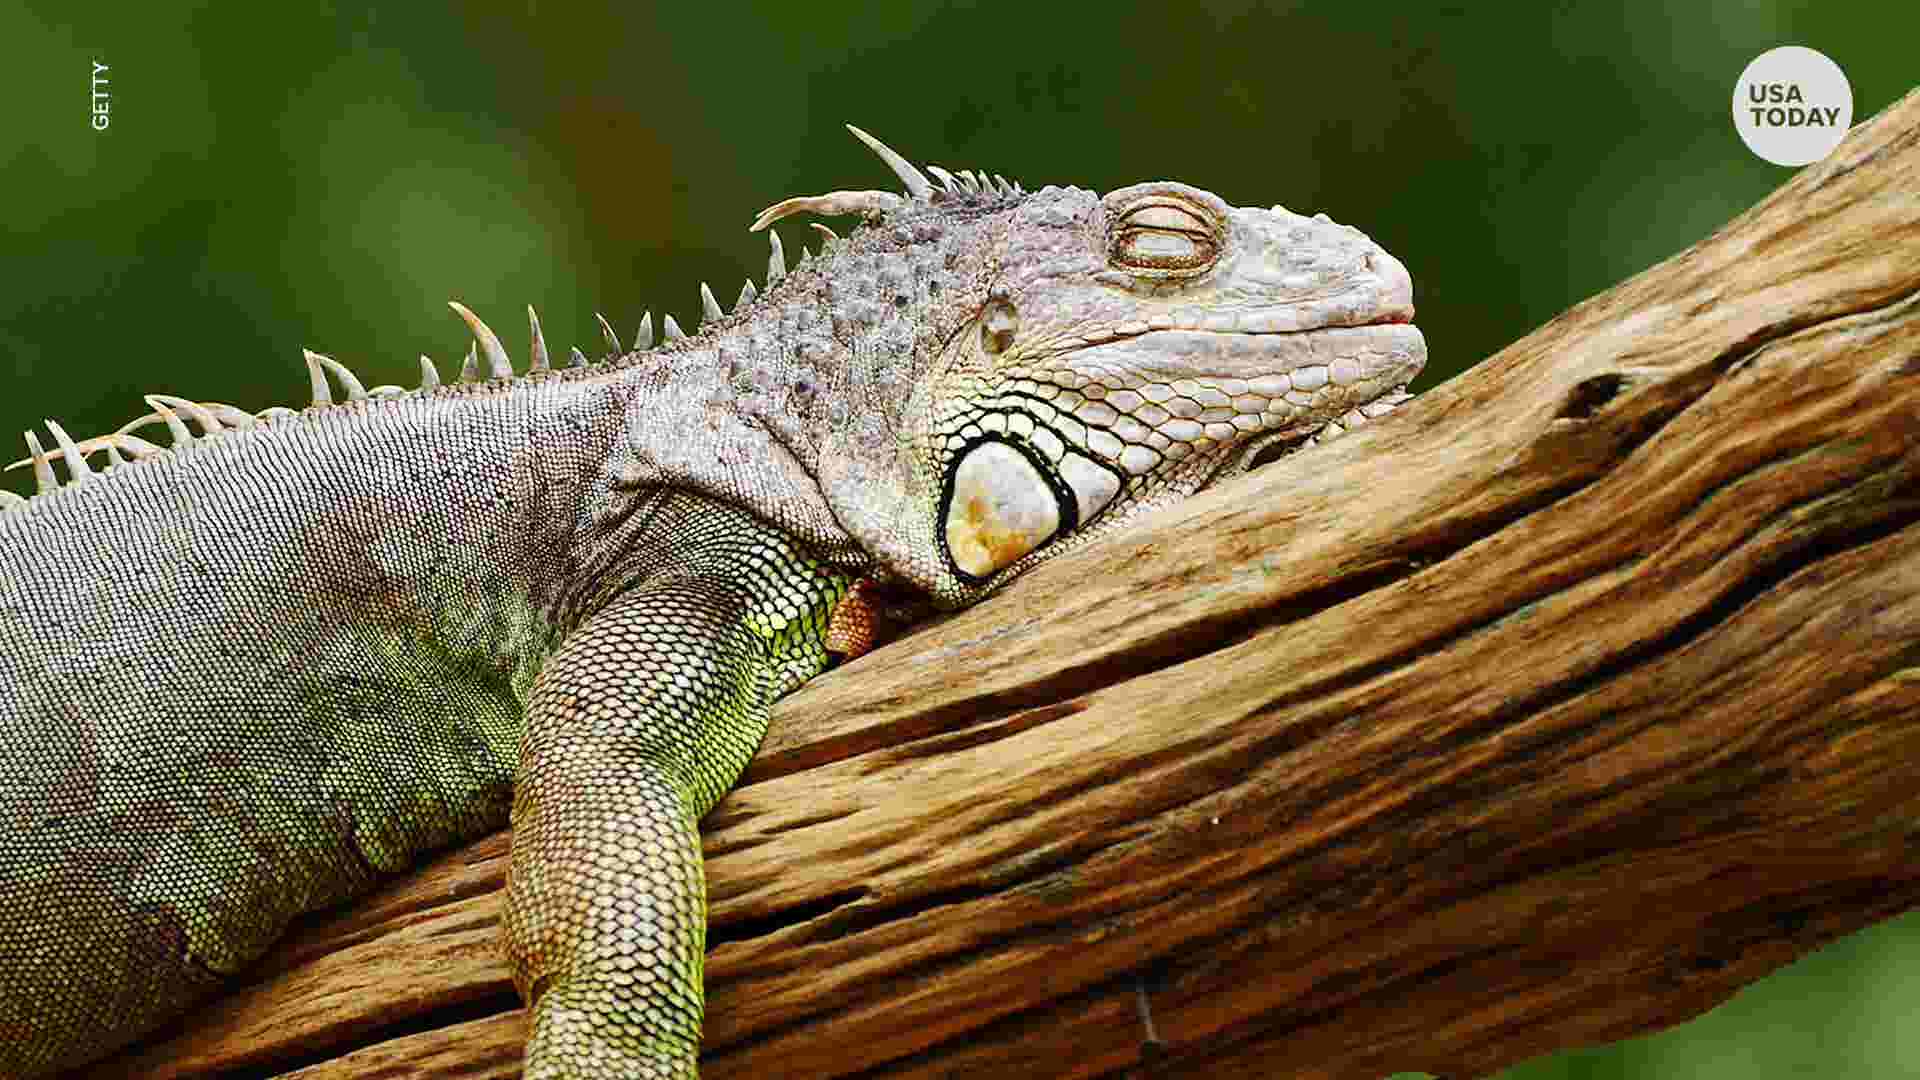 'Falling iguana' alert issued in Florida due to cold temperatures